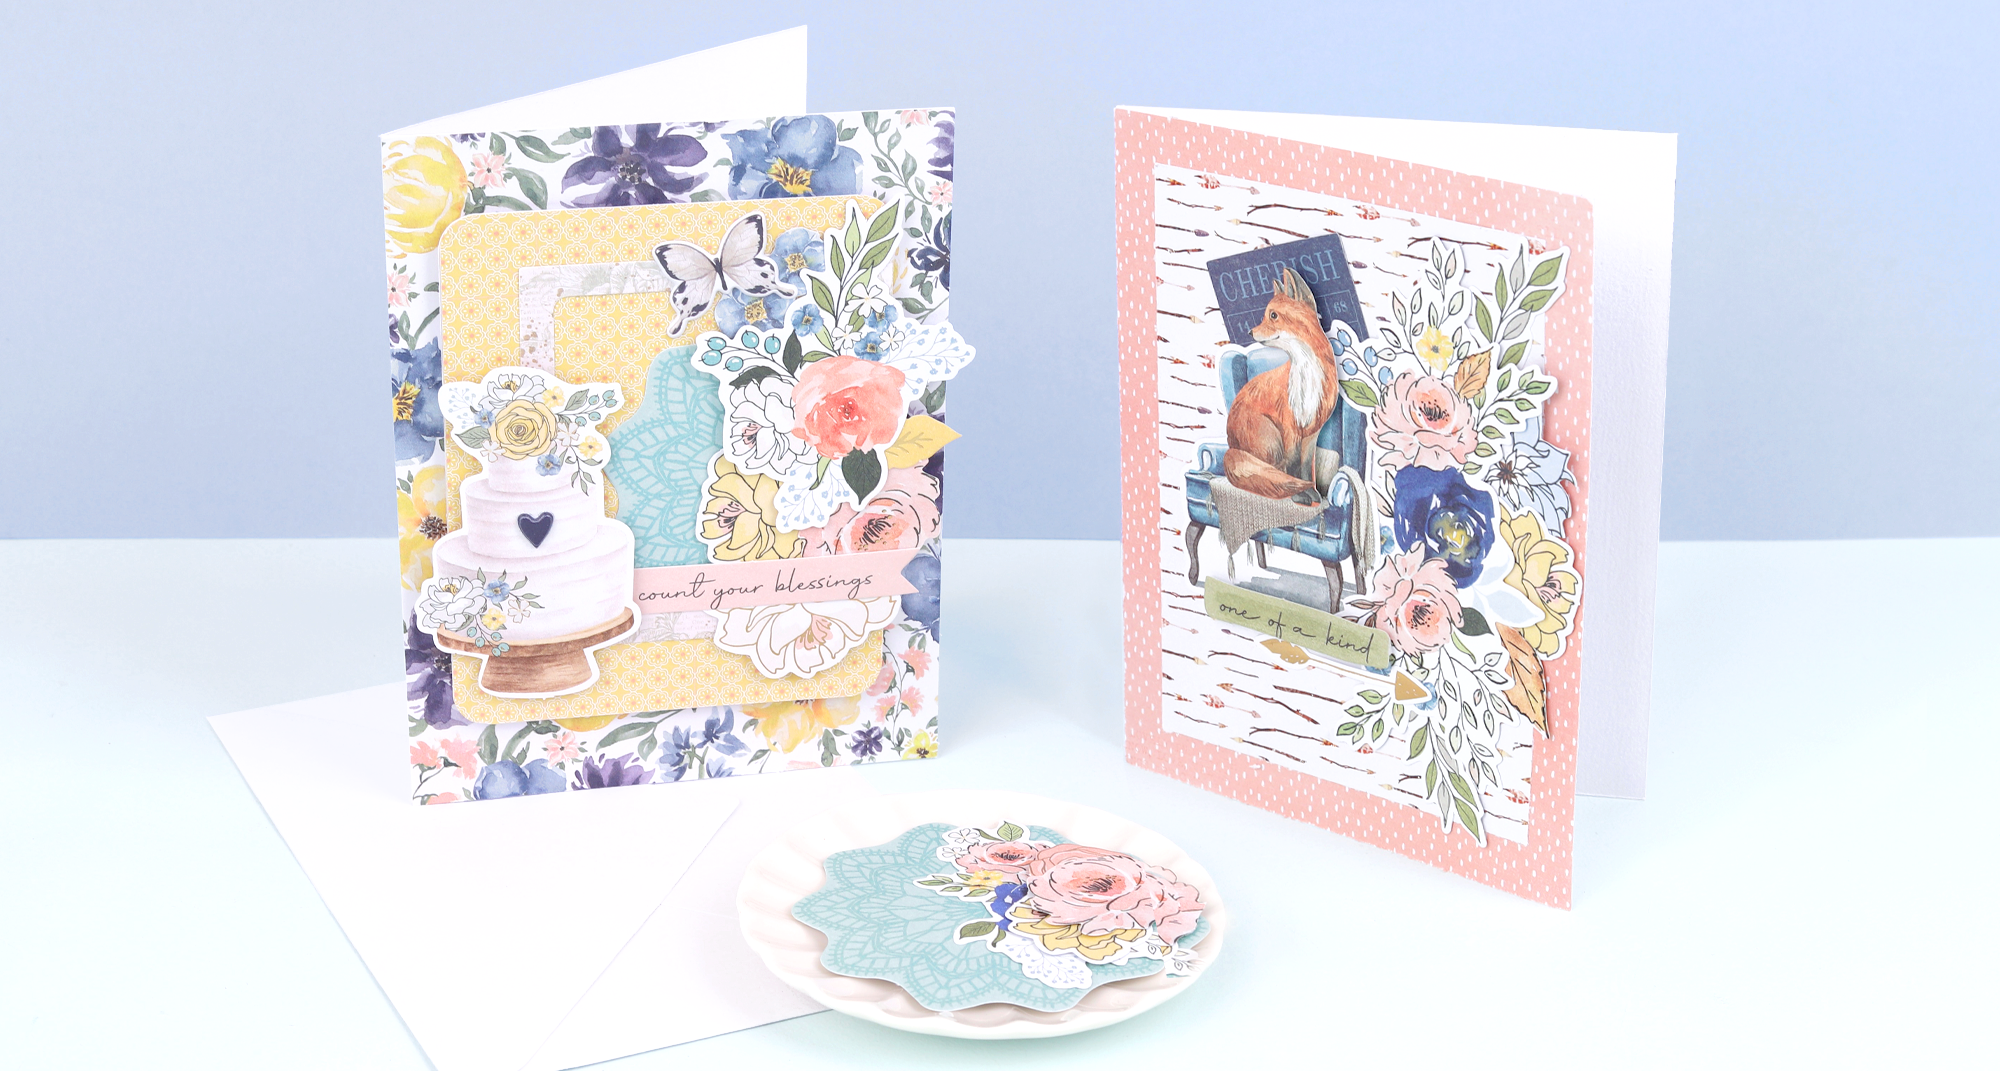 Rosie's Studio Wildwood, handmade cards using 12x12 papers and cardstock ephemera featuring foxes and florals, woodsy rustic theme.